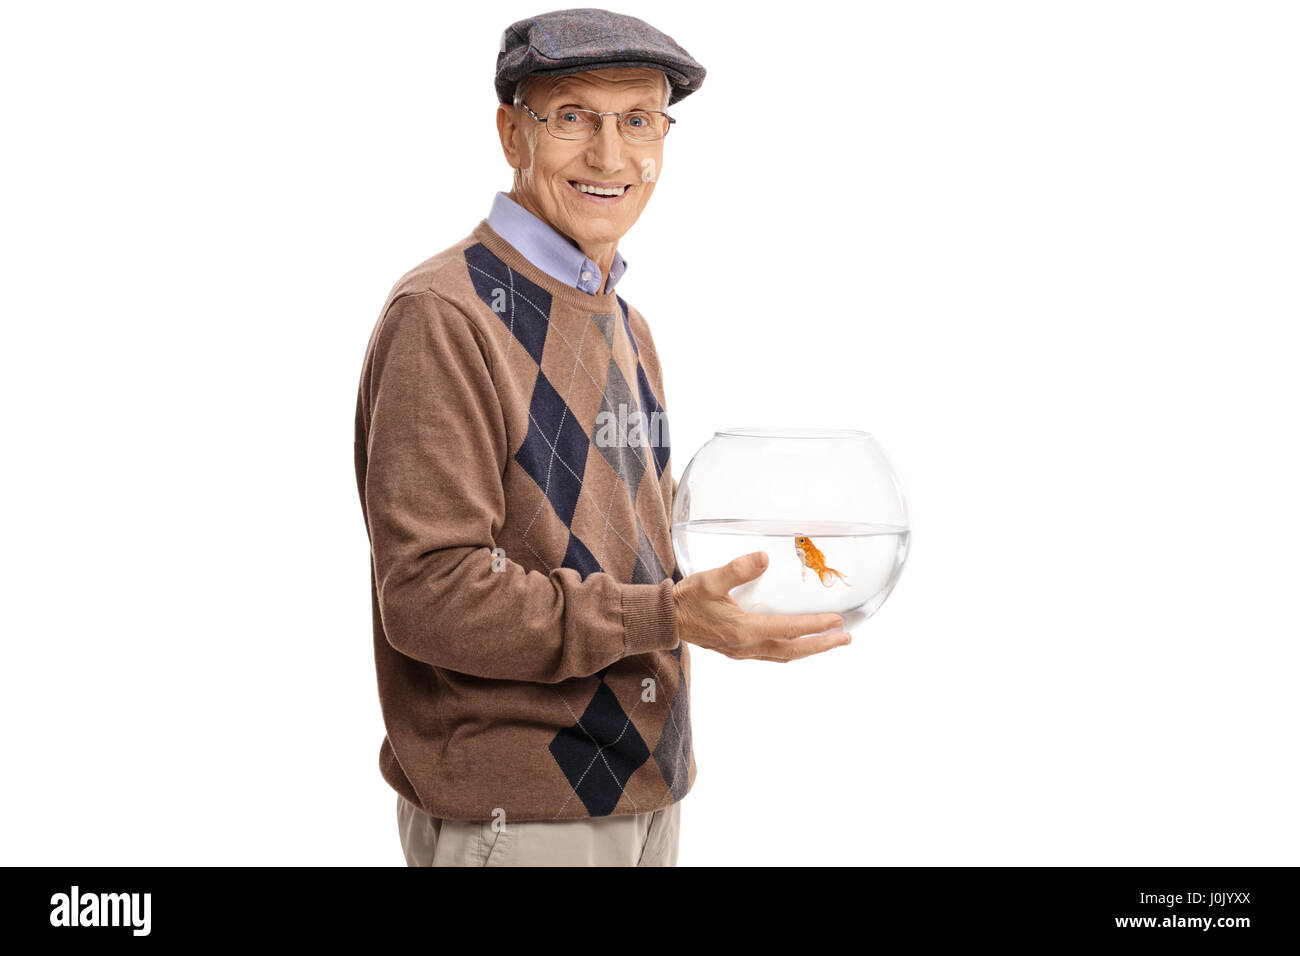 Elderly man holding a bowl with a goldfish and looking at the camera isolated on white background Stock Photo